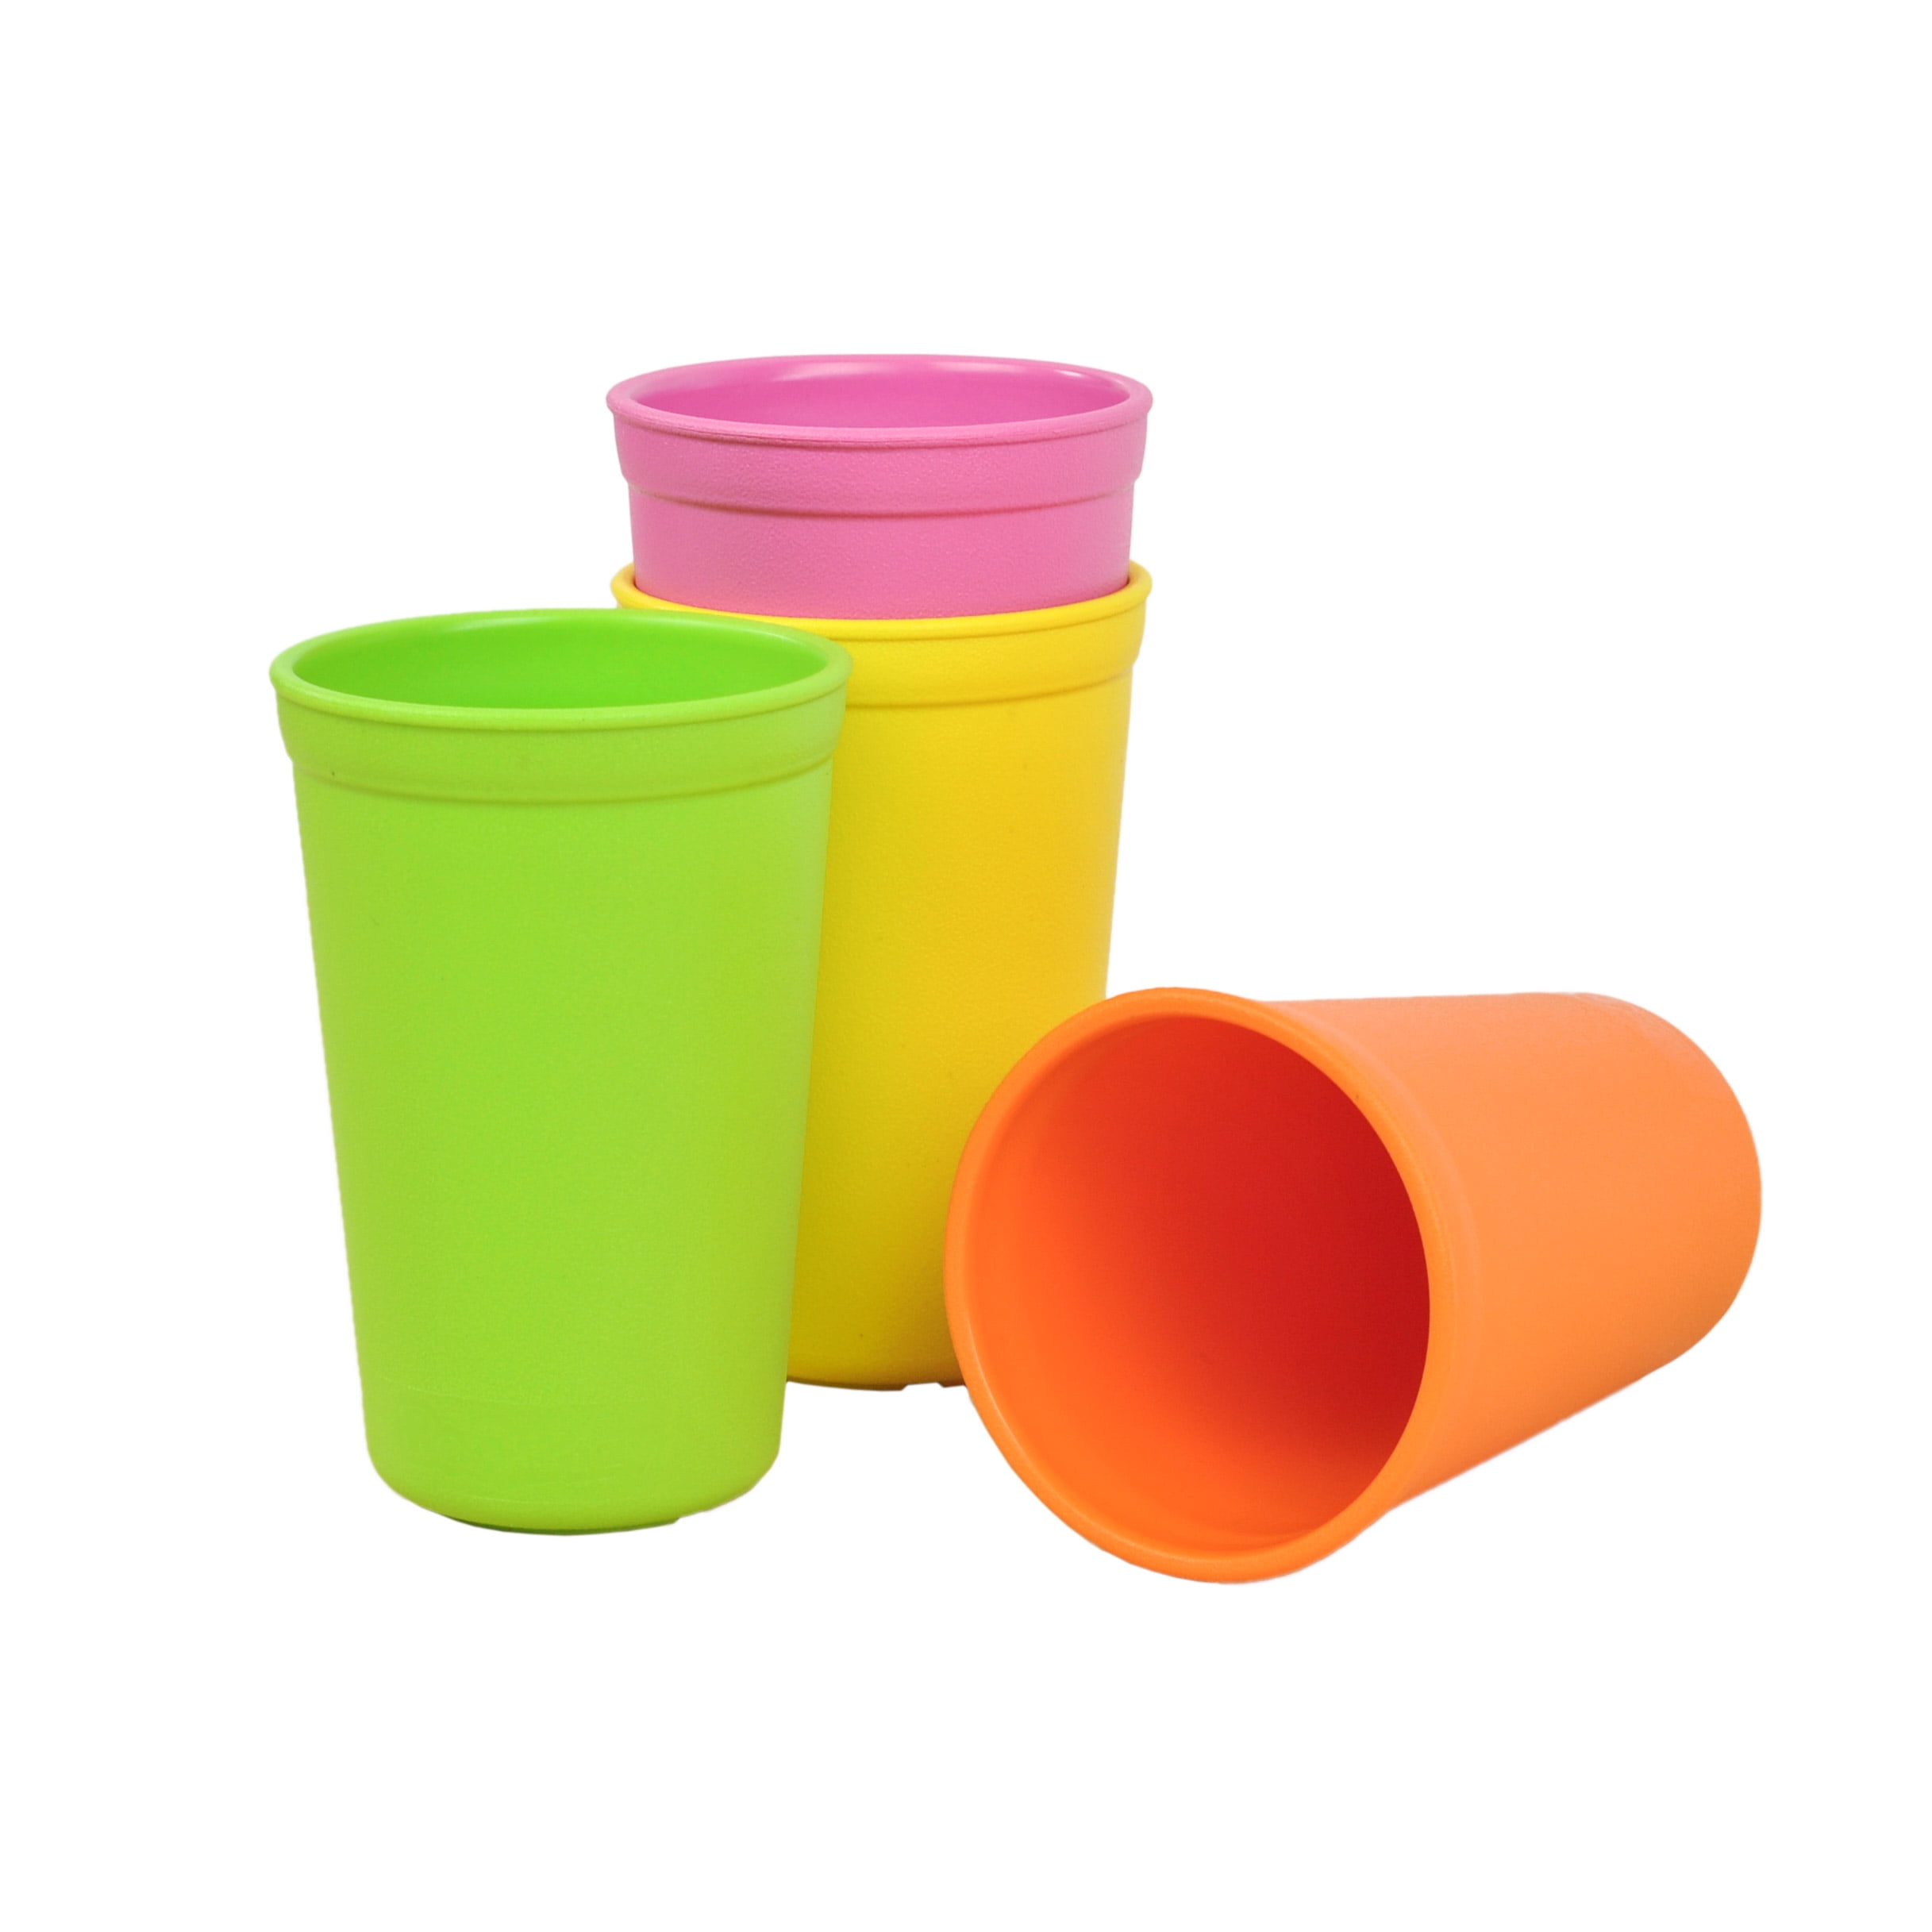 12 Small Cups Lids Straws 12 Oz Mix Pink Yellow Lime Orange Mfg in USA No BPA 